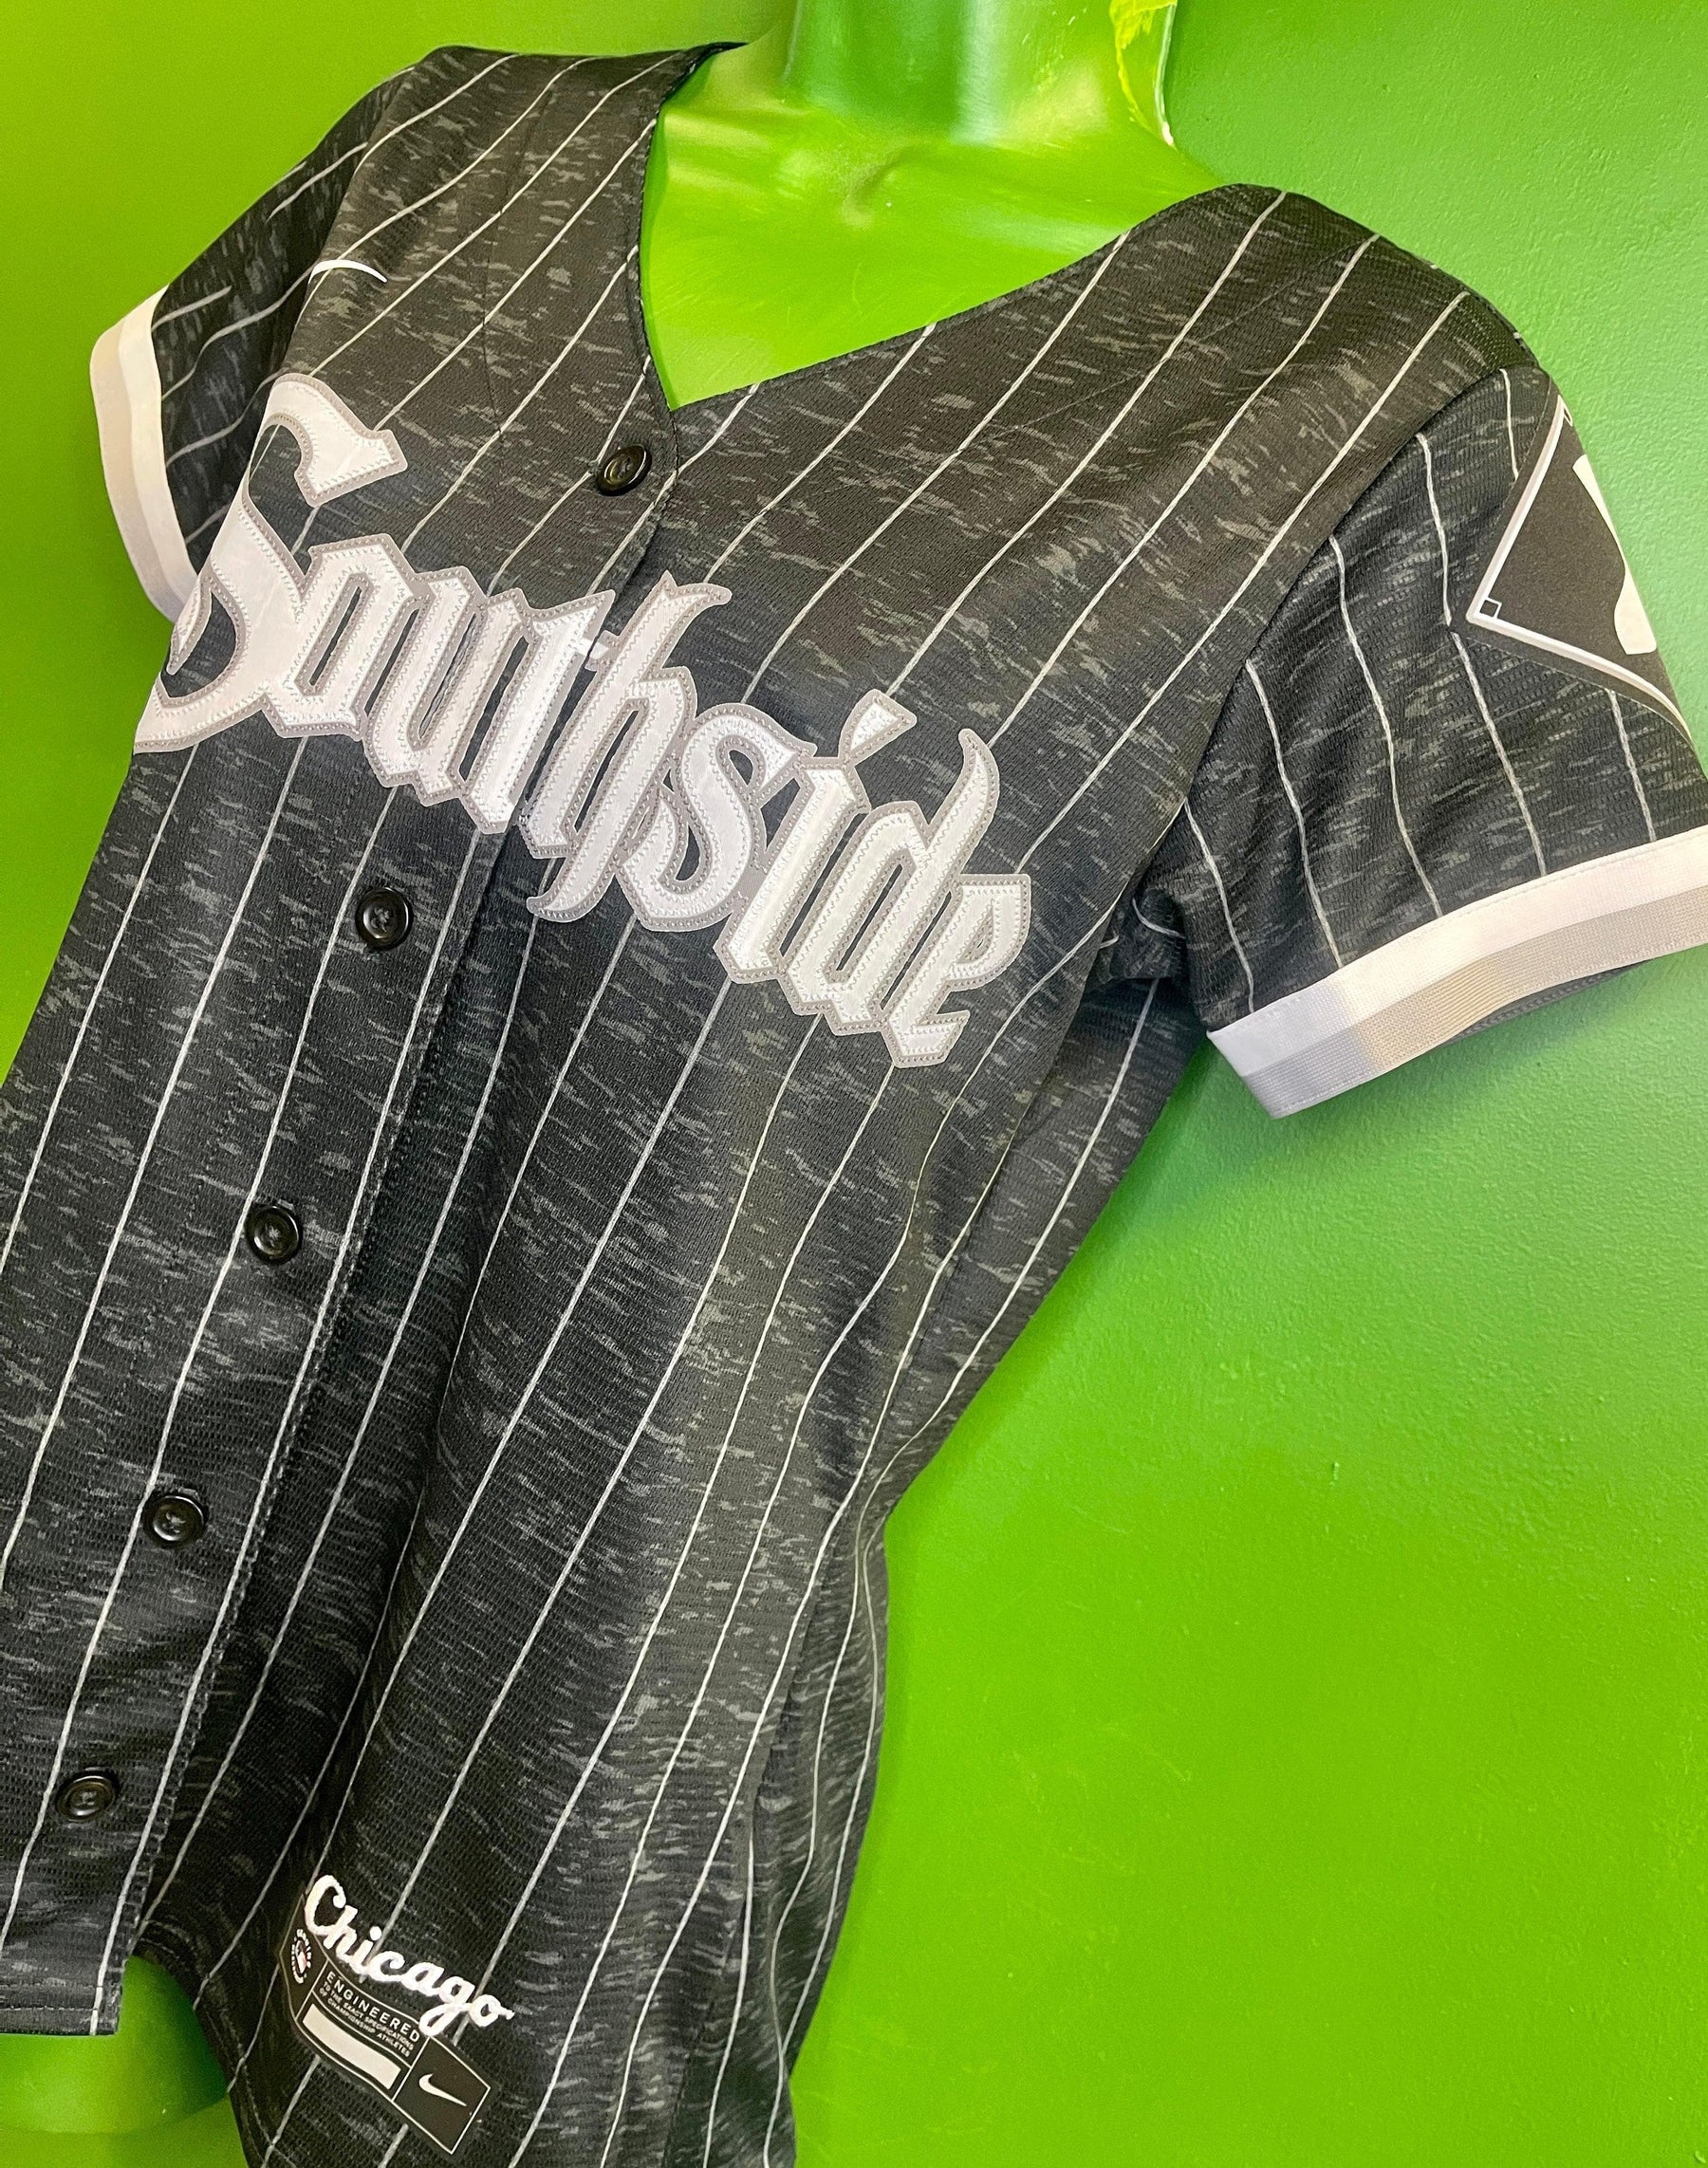 MLB Chicago White Sox City Connect Player Jersey Women's Small NWT